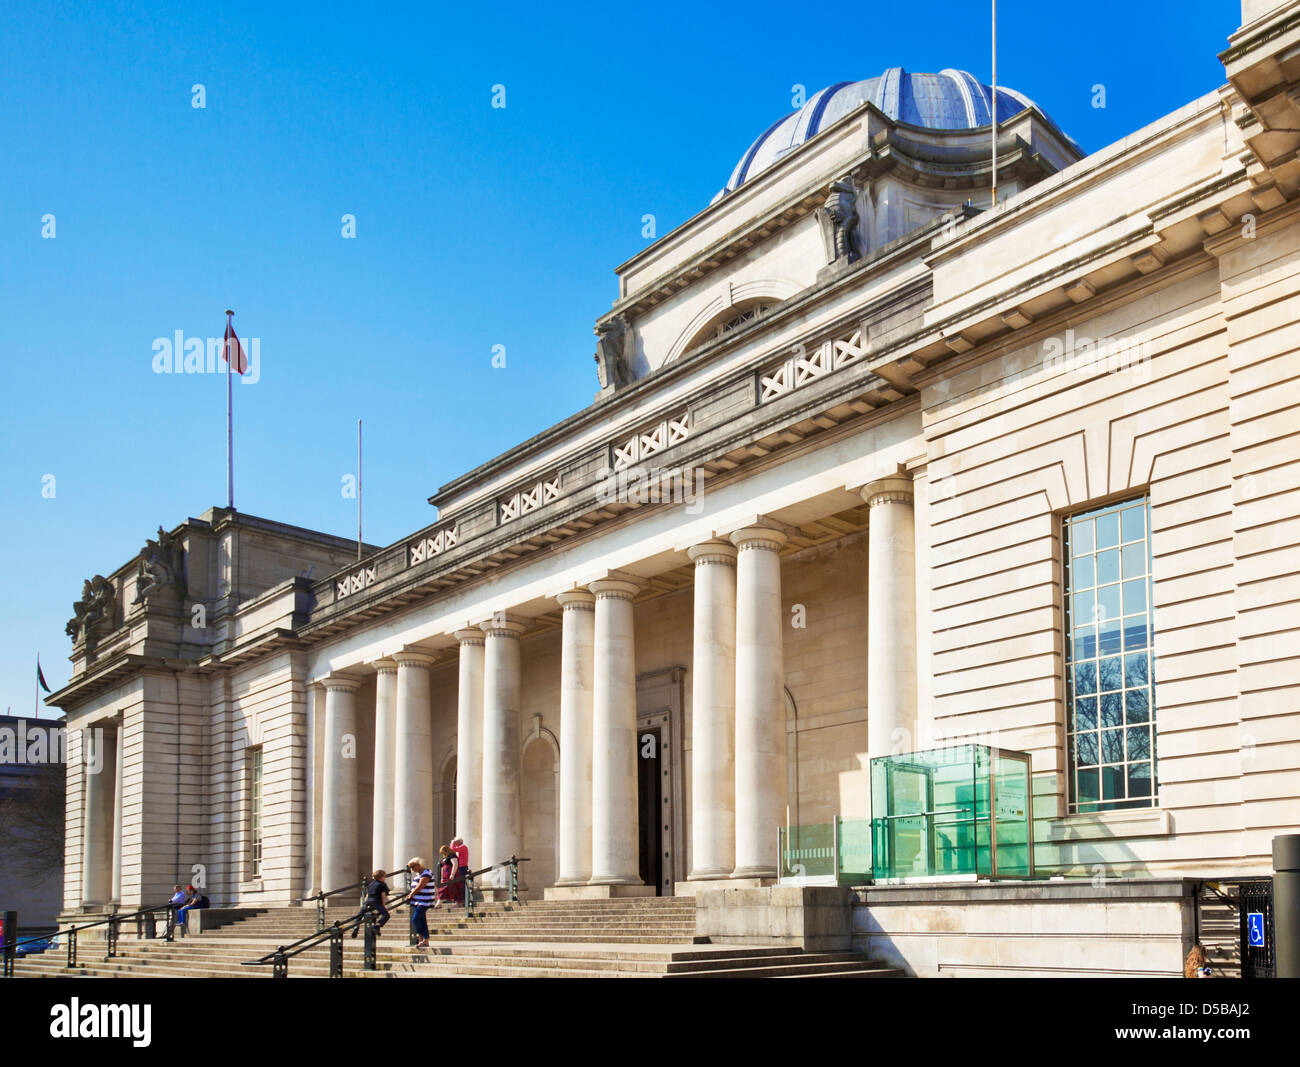 National Museum of wales Cardiff, Cathays park Cardiff South Glamorgan South Wales GB UK EU Europe Stock Photo